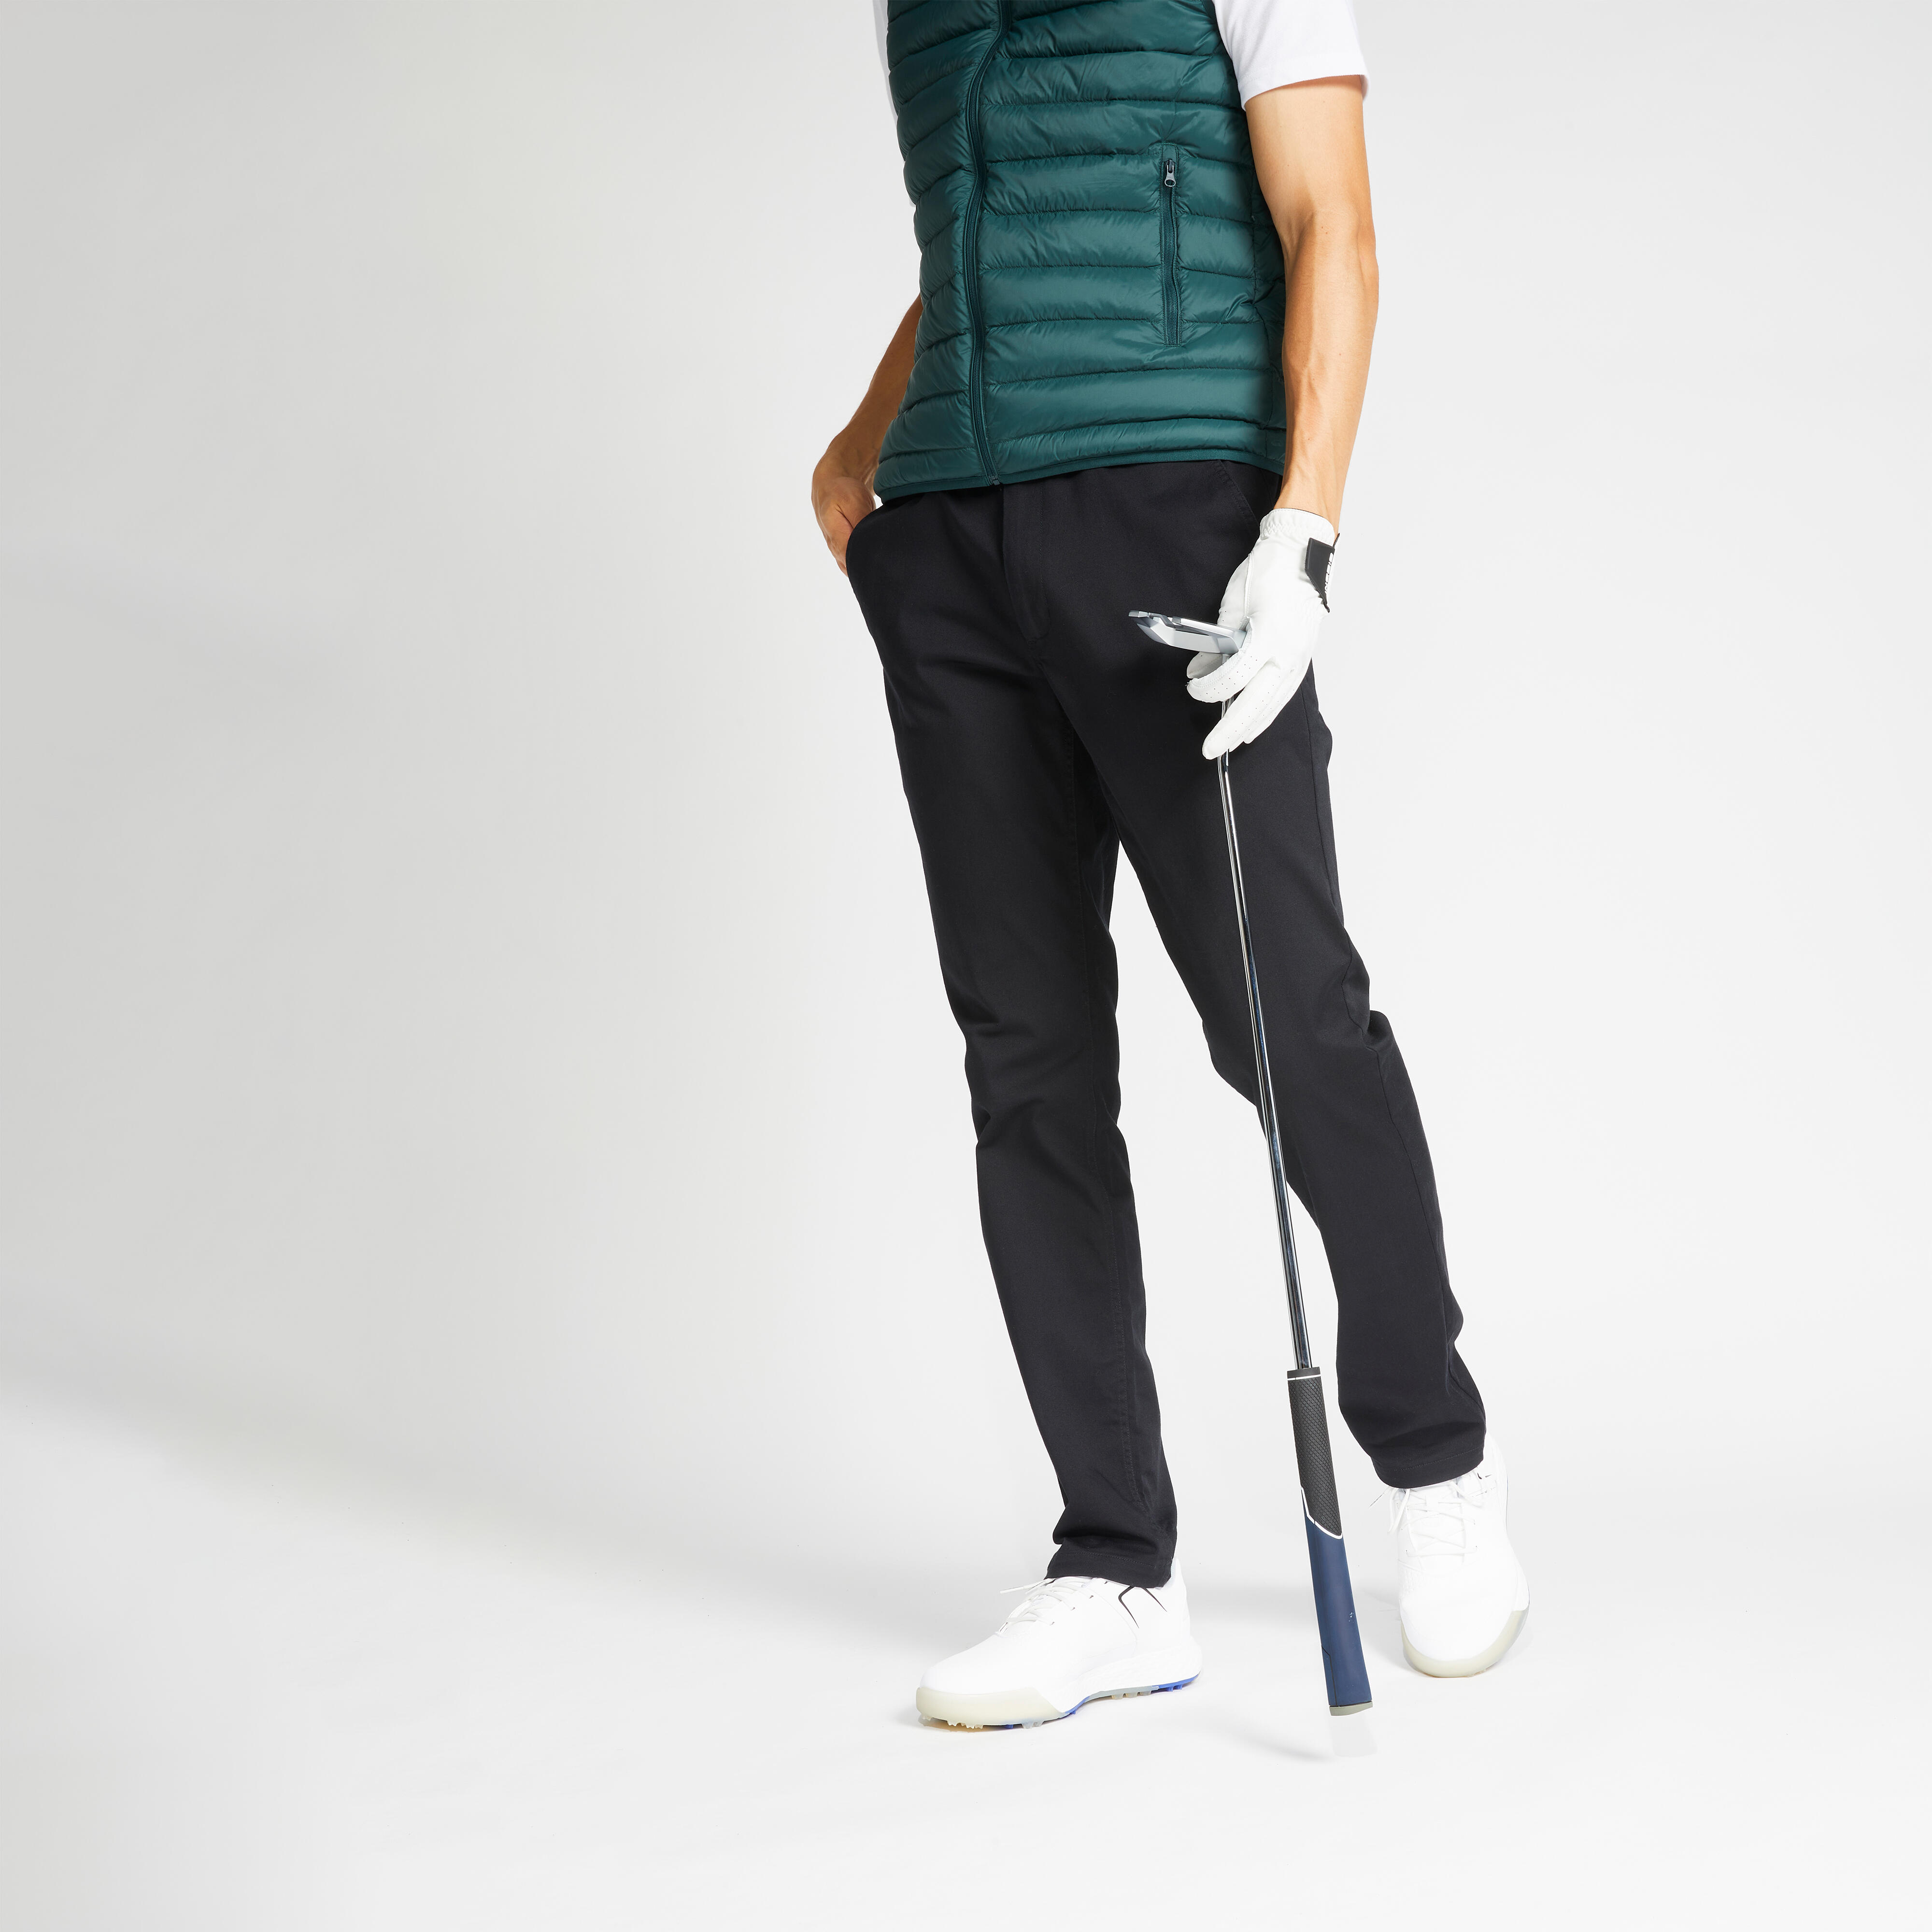 Golf Track Trousers - Buy Golf Track Trousers online in India